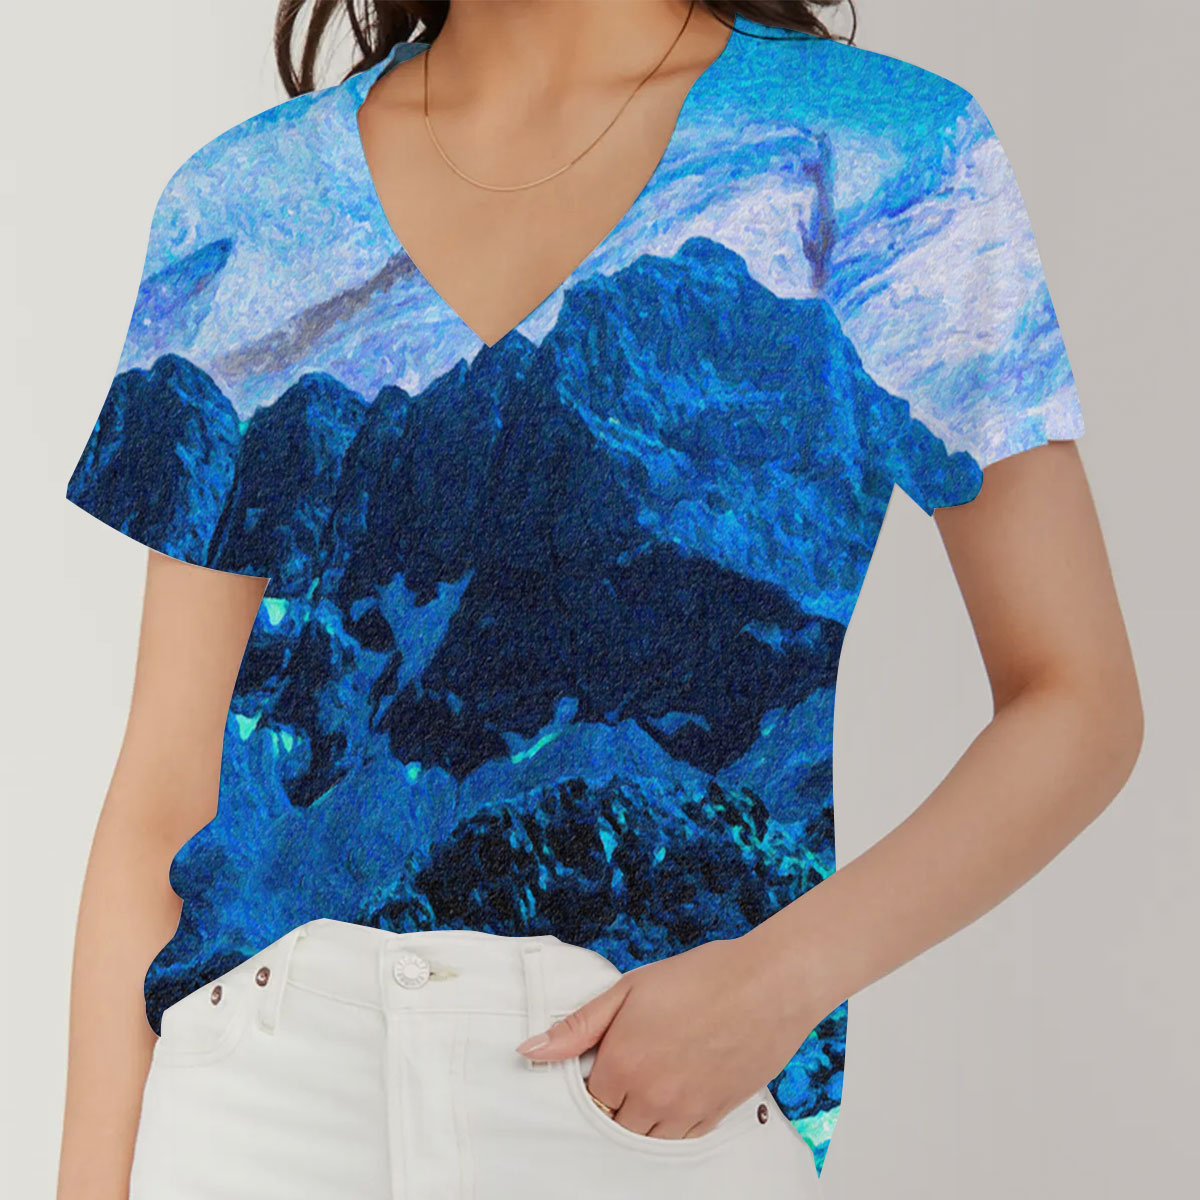 Cool Winer Abstract V-Neck Women's T-Shirt_1_2.1